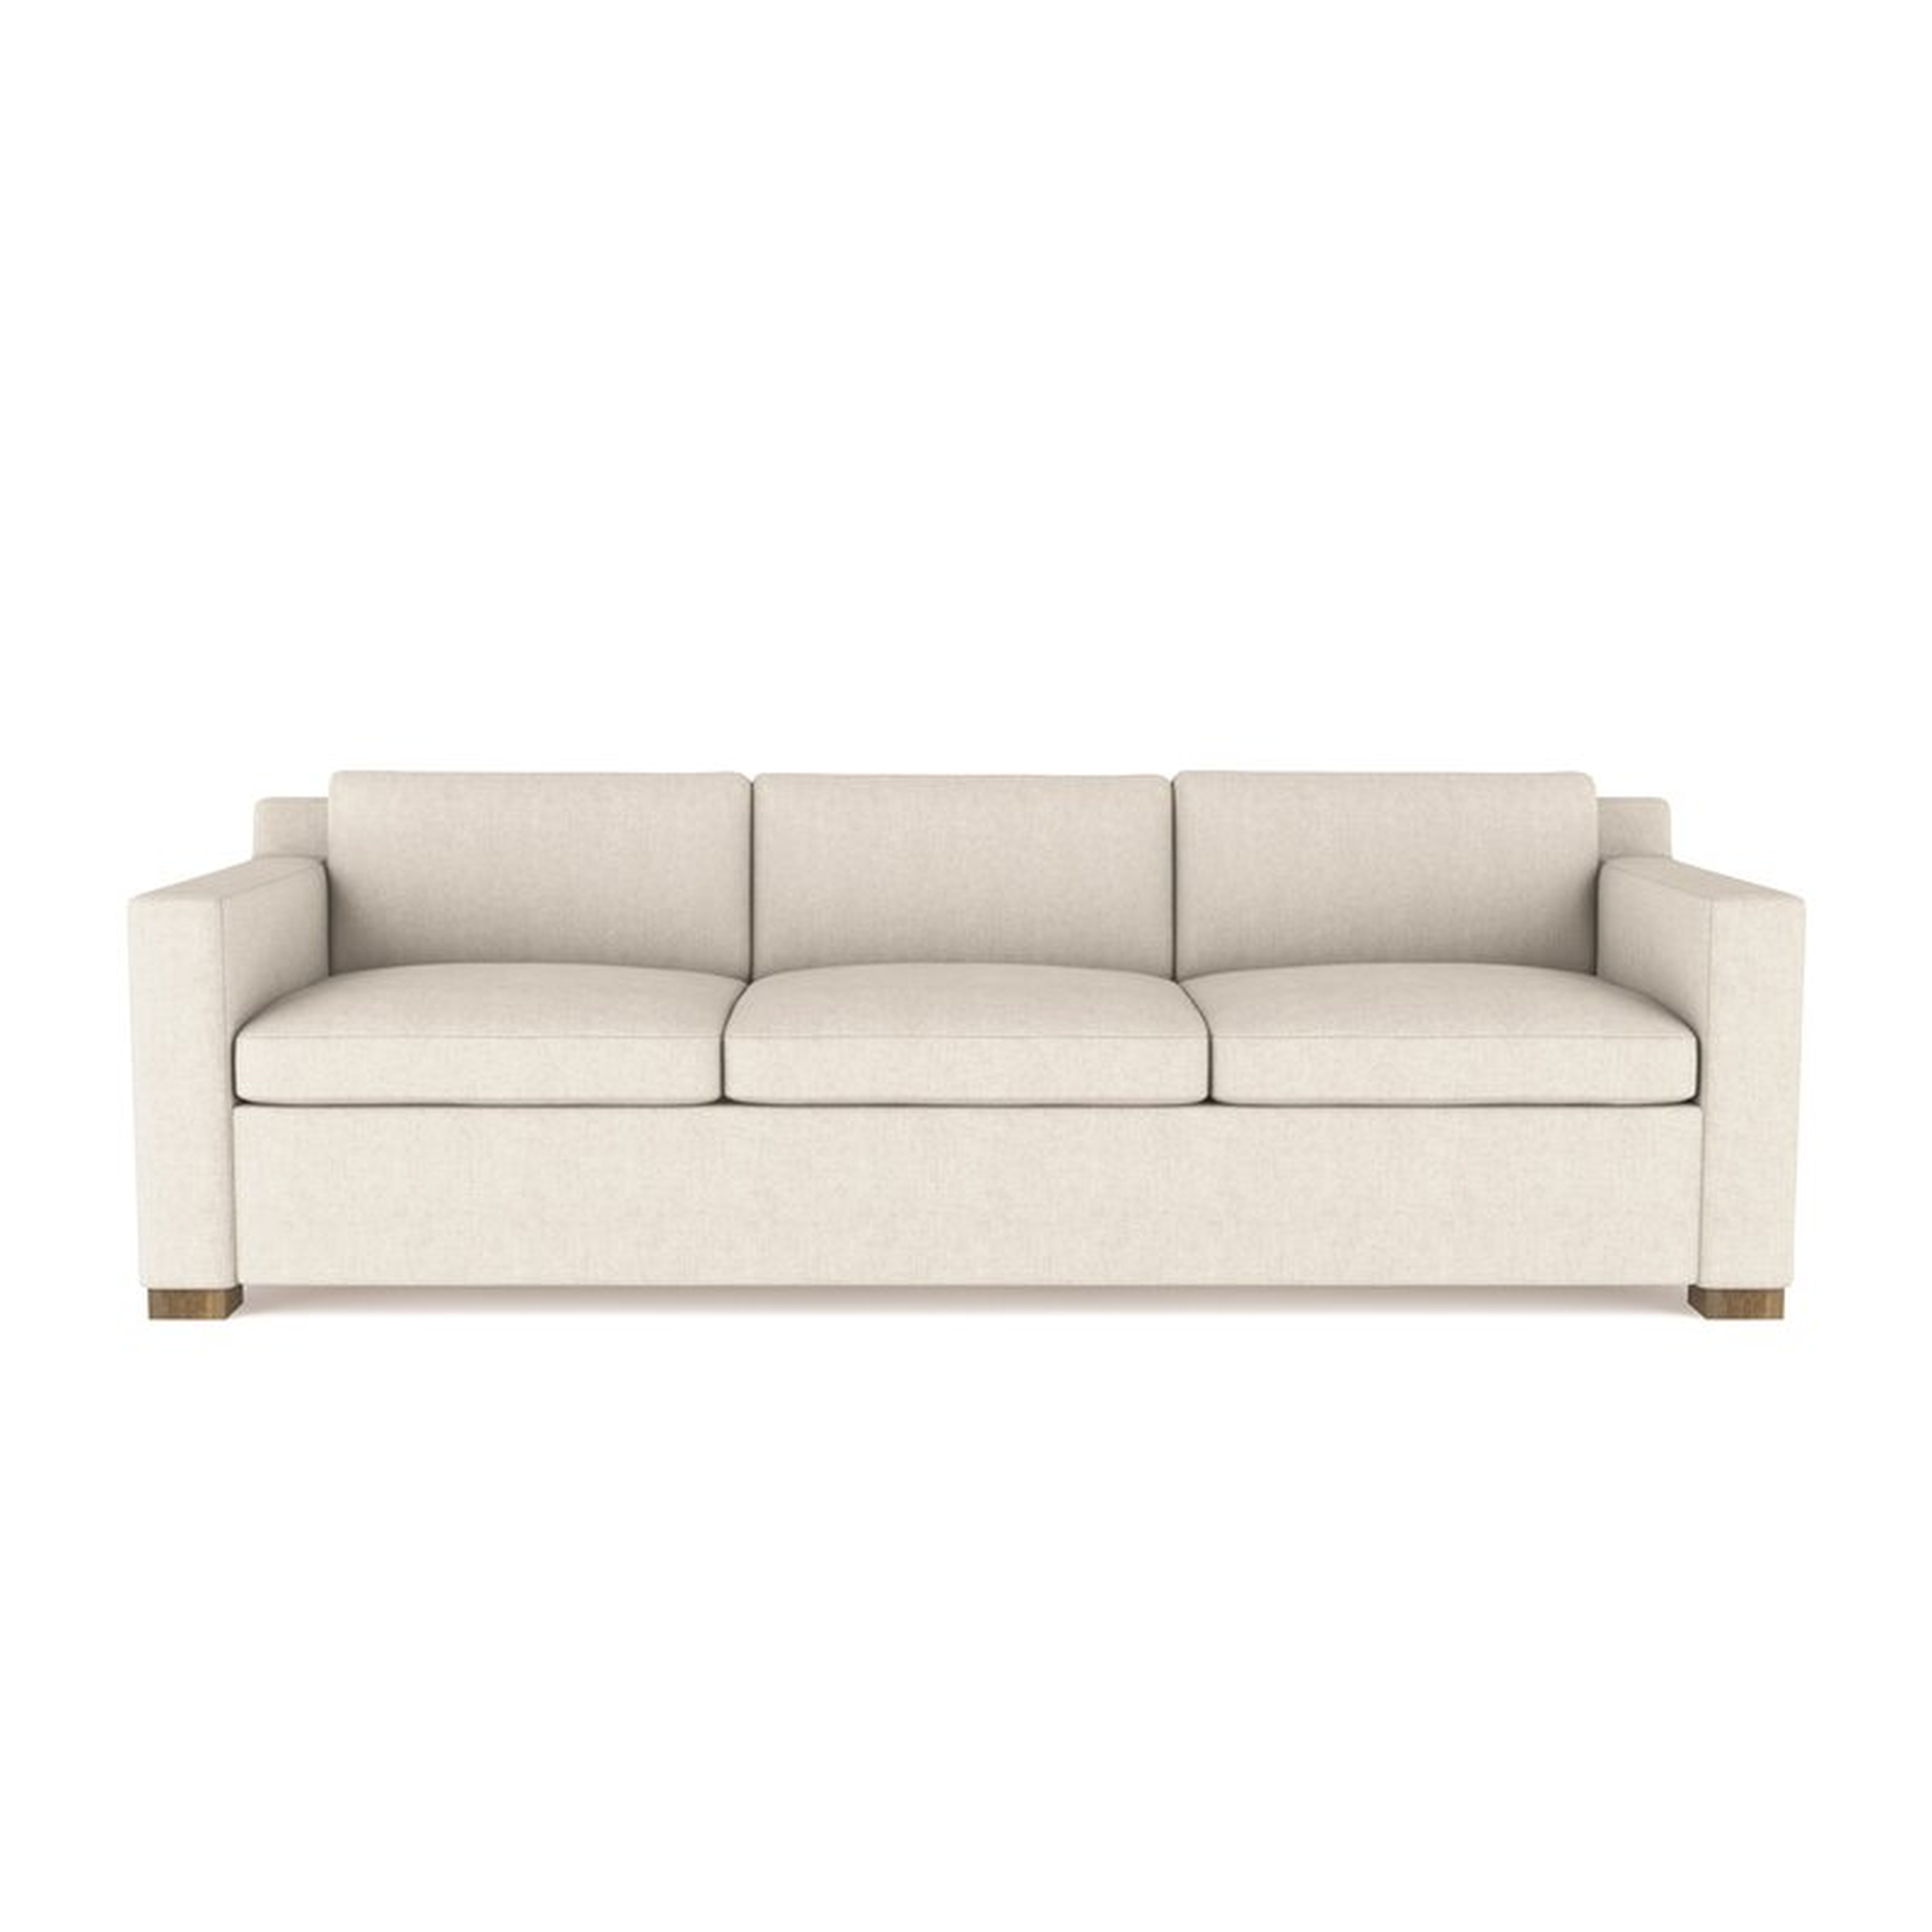 Tandem Arbor Marcy Sofa Upholstery: Linen Alabaster, Size: 33.5" H x 108" W x 44" D - Perigold